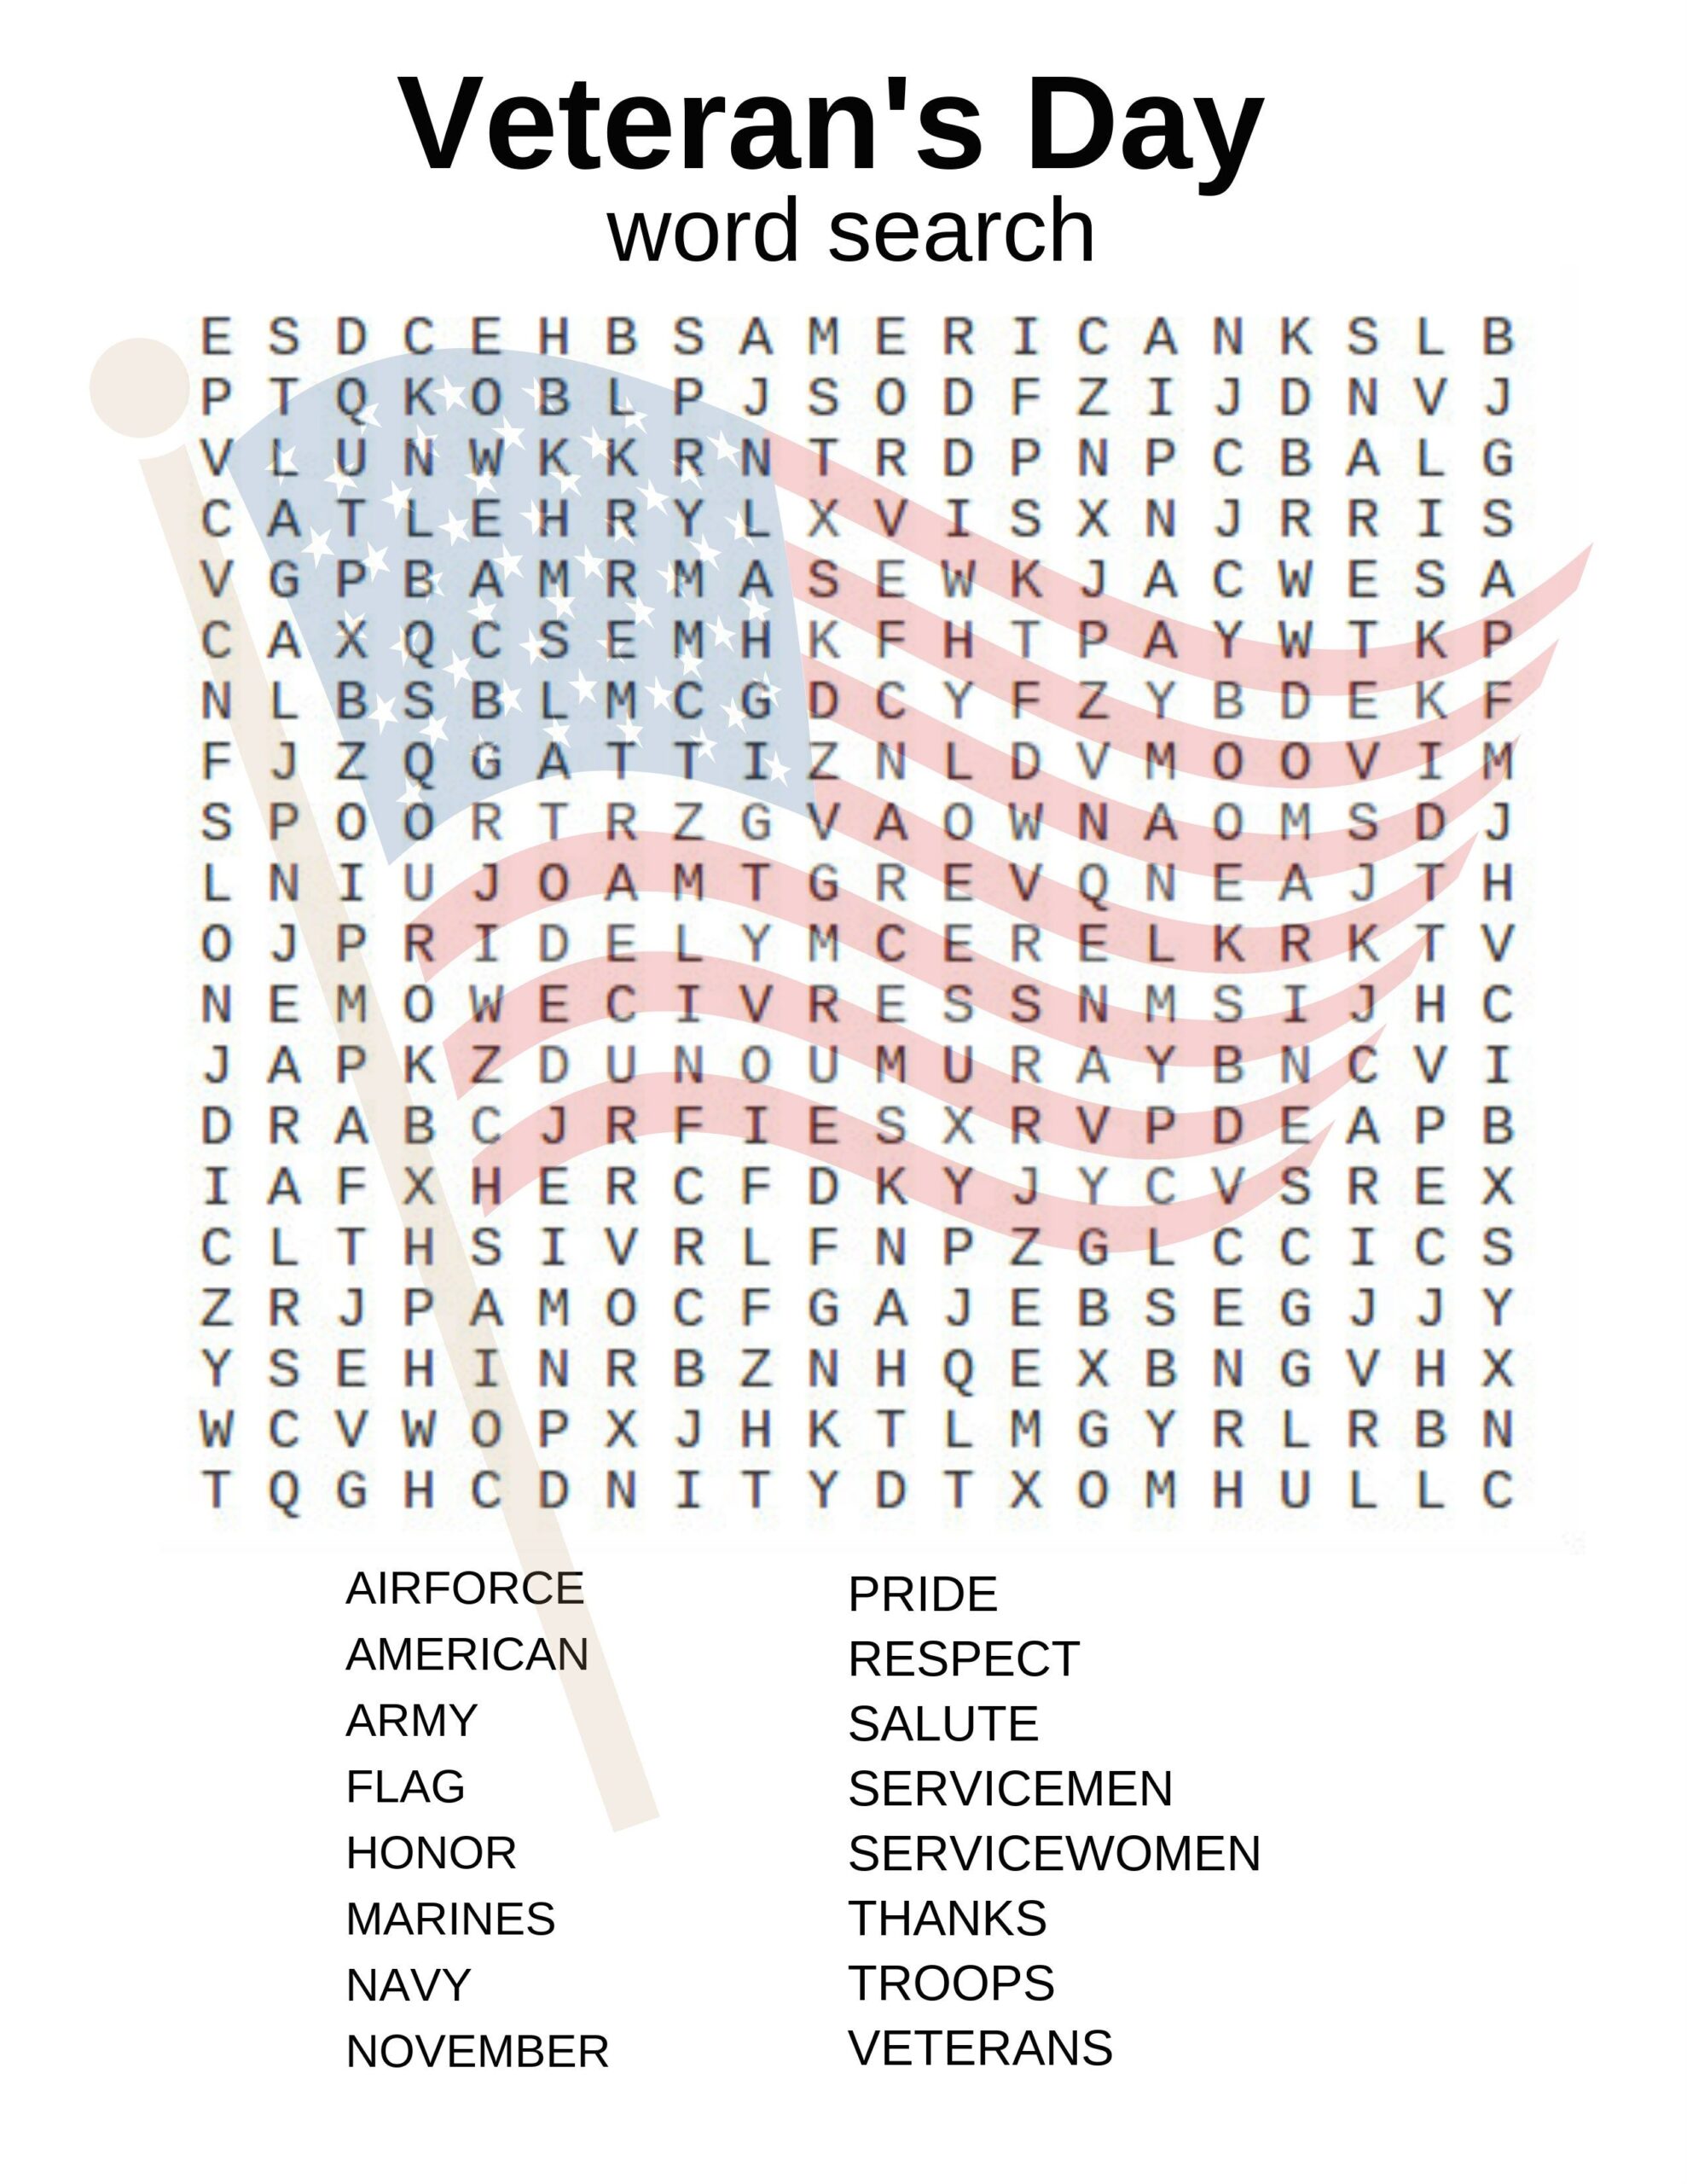 Veteran s Day Activities Free Printables crossword Word Search Matching Game Veterans Day Activities Veterans Day Coloring Page Veterans Day